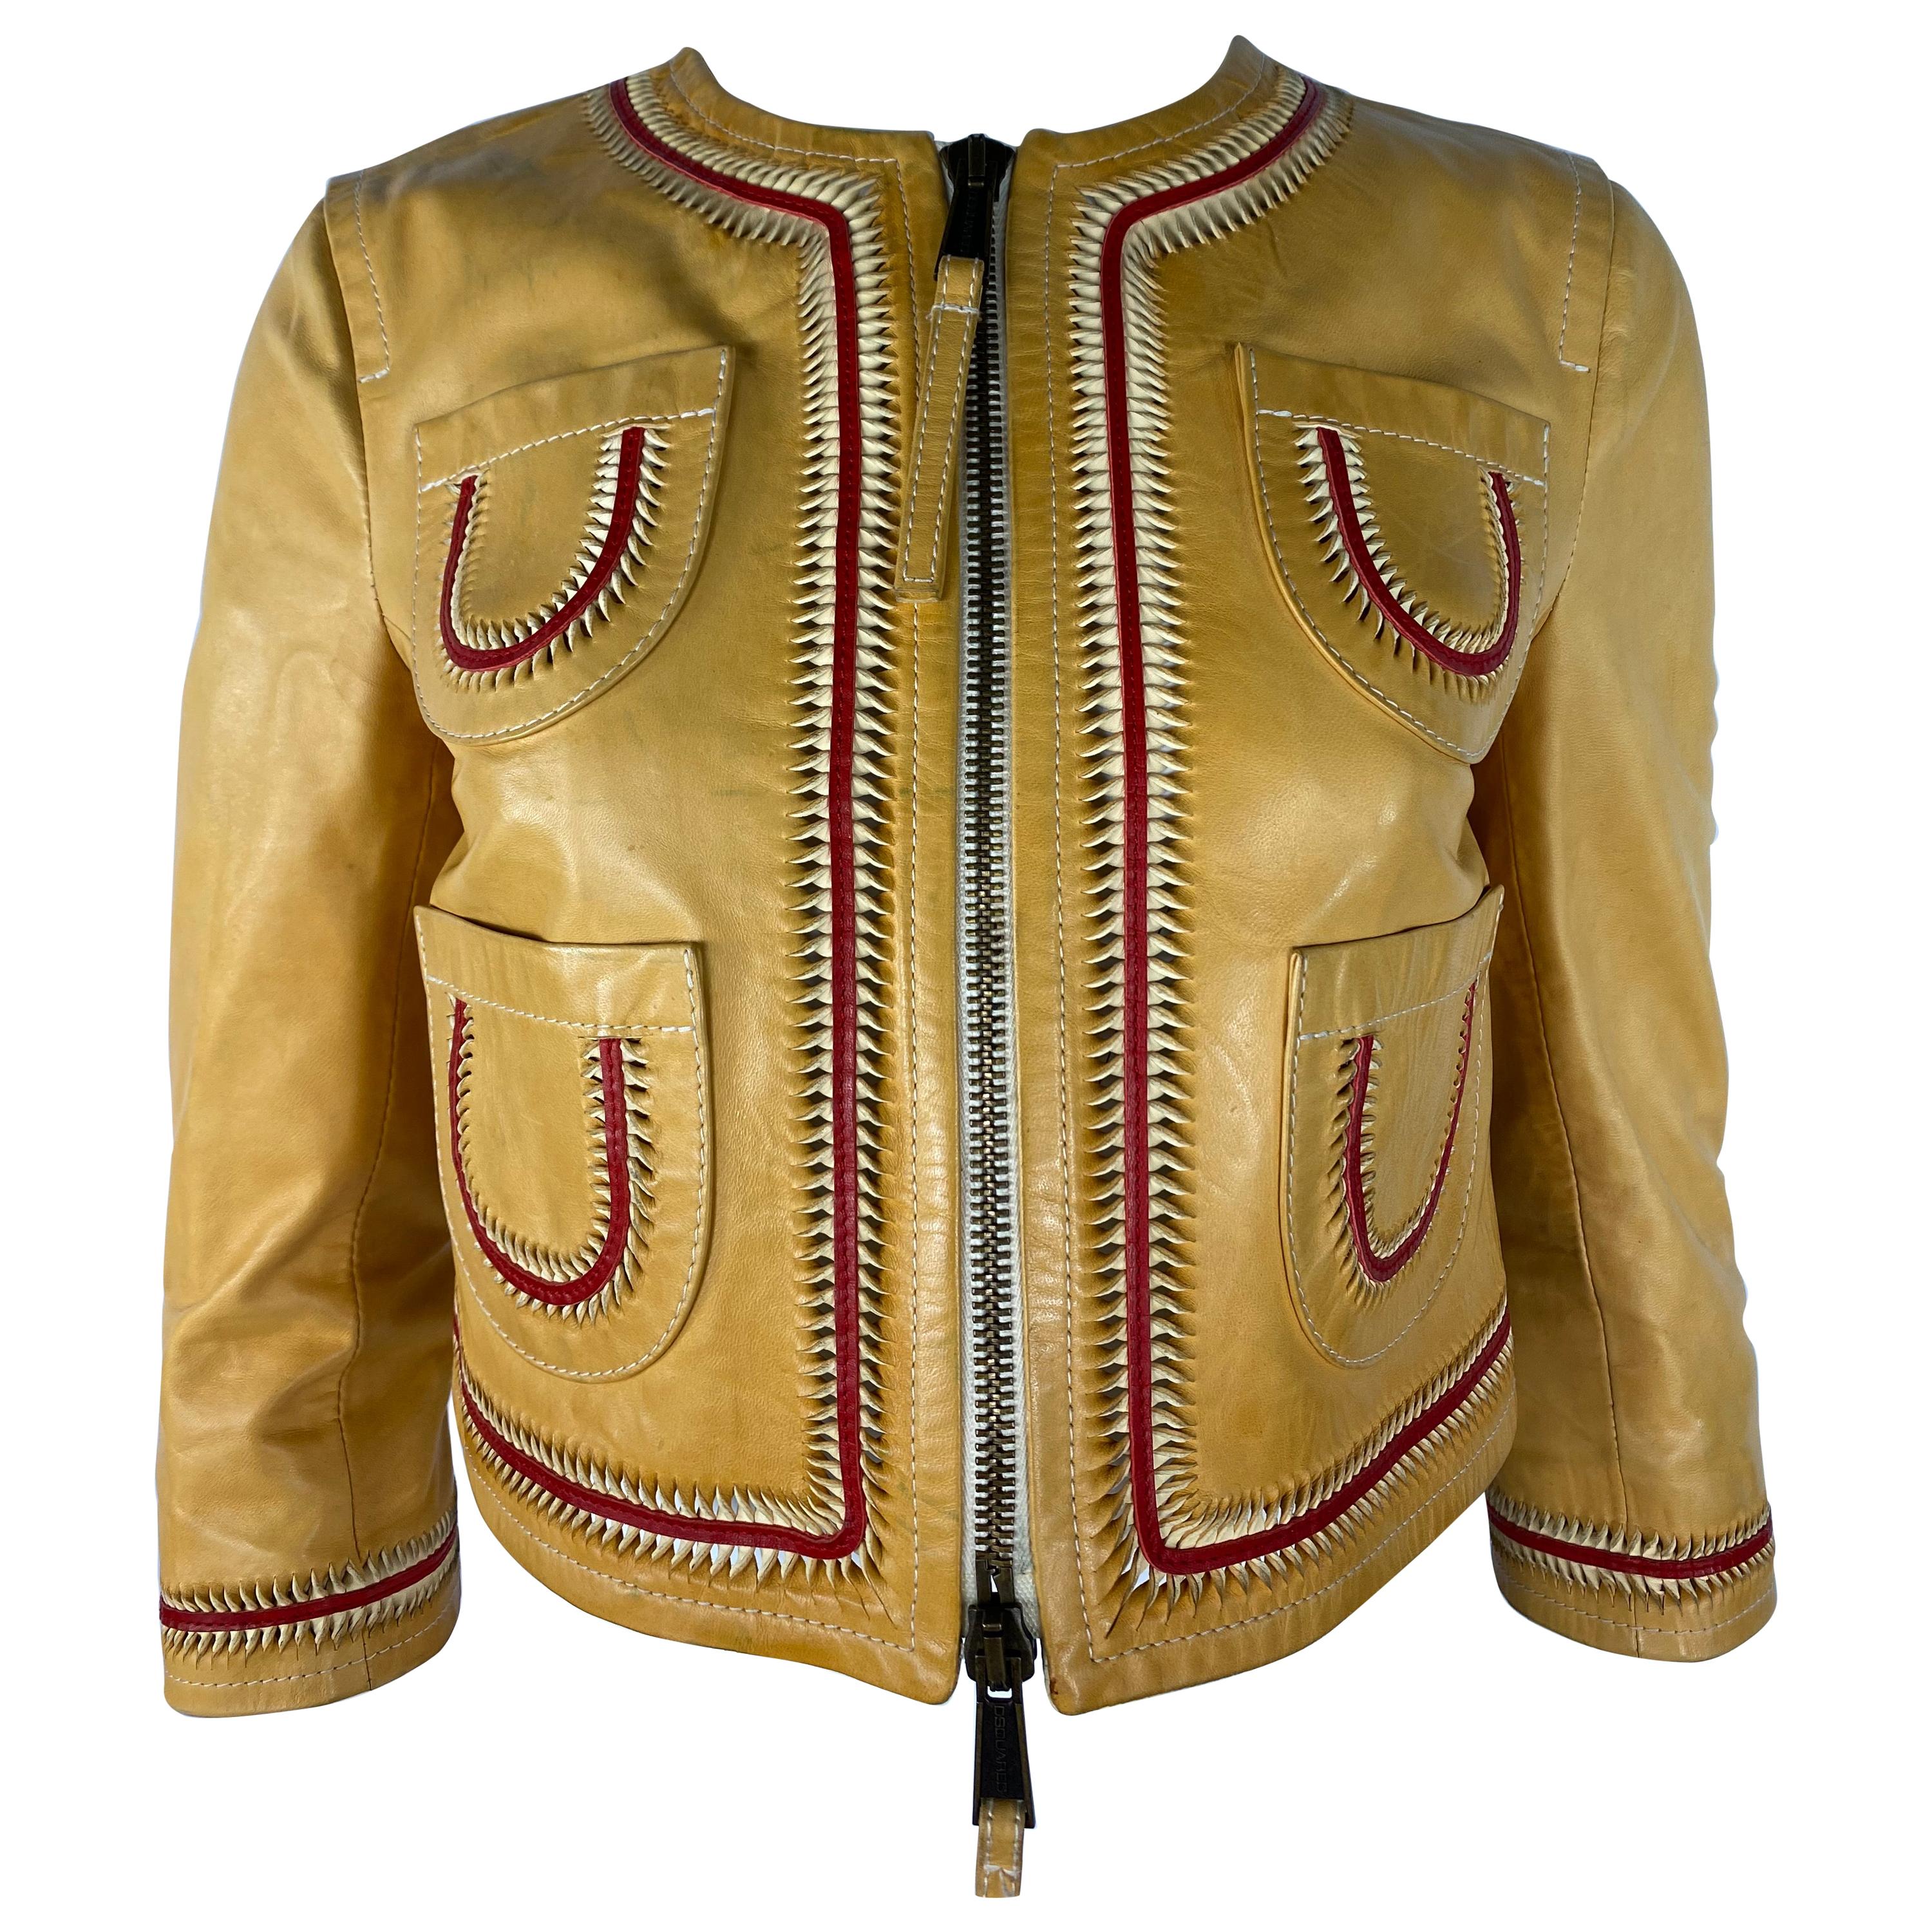 Yellow Leather Jackets - 9 For Sale on 1stDibs | yellow biker jackets